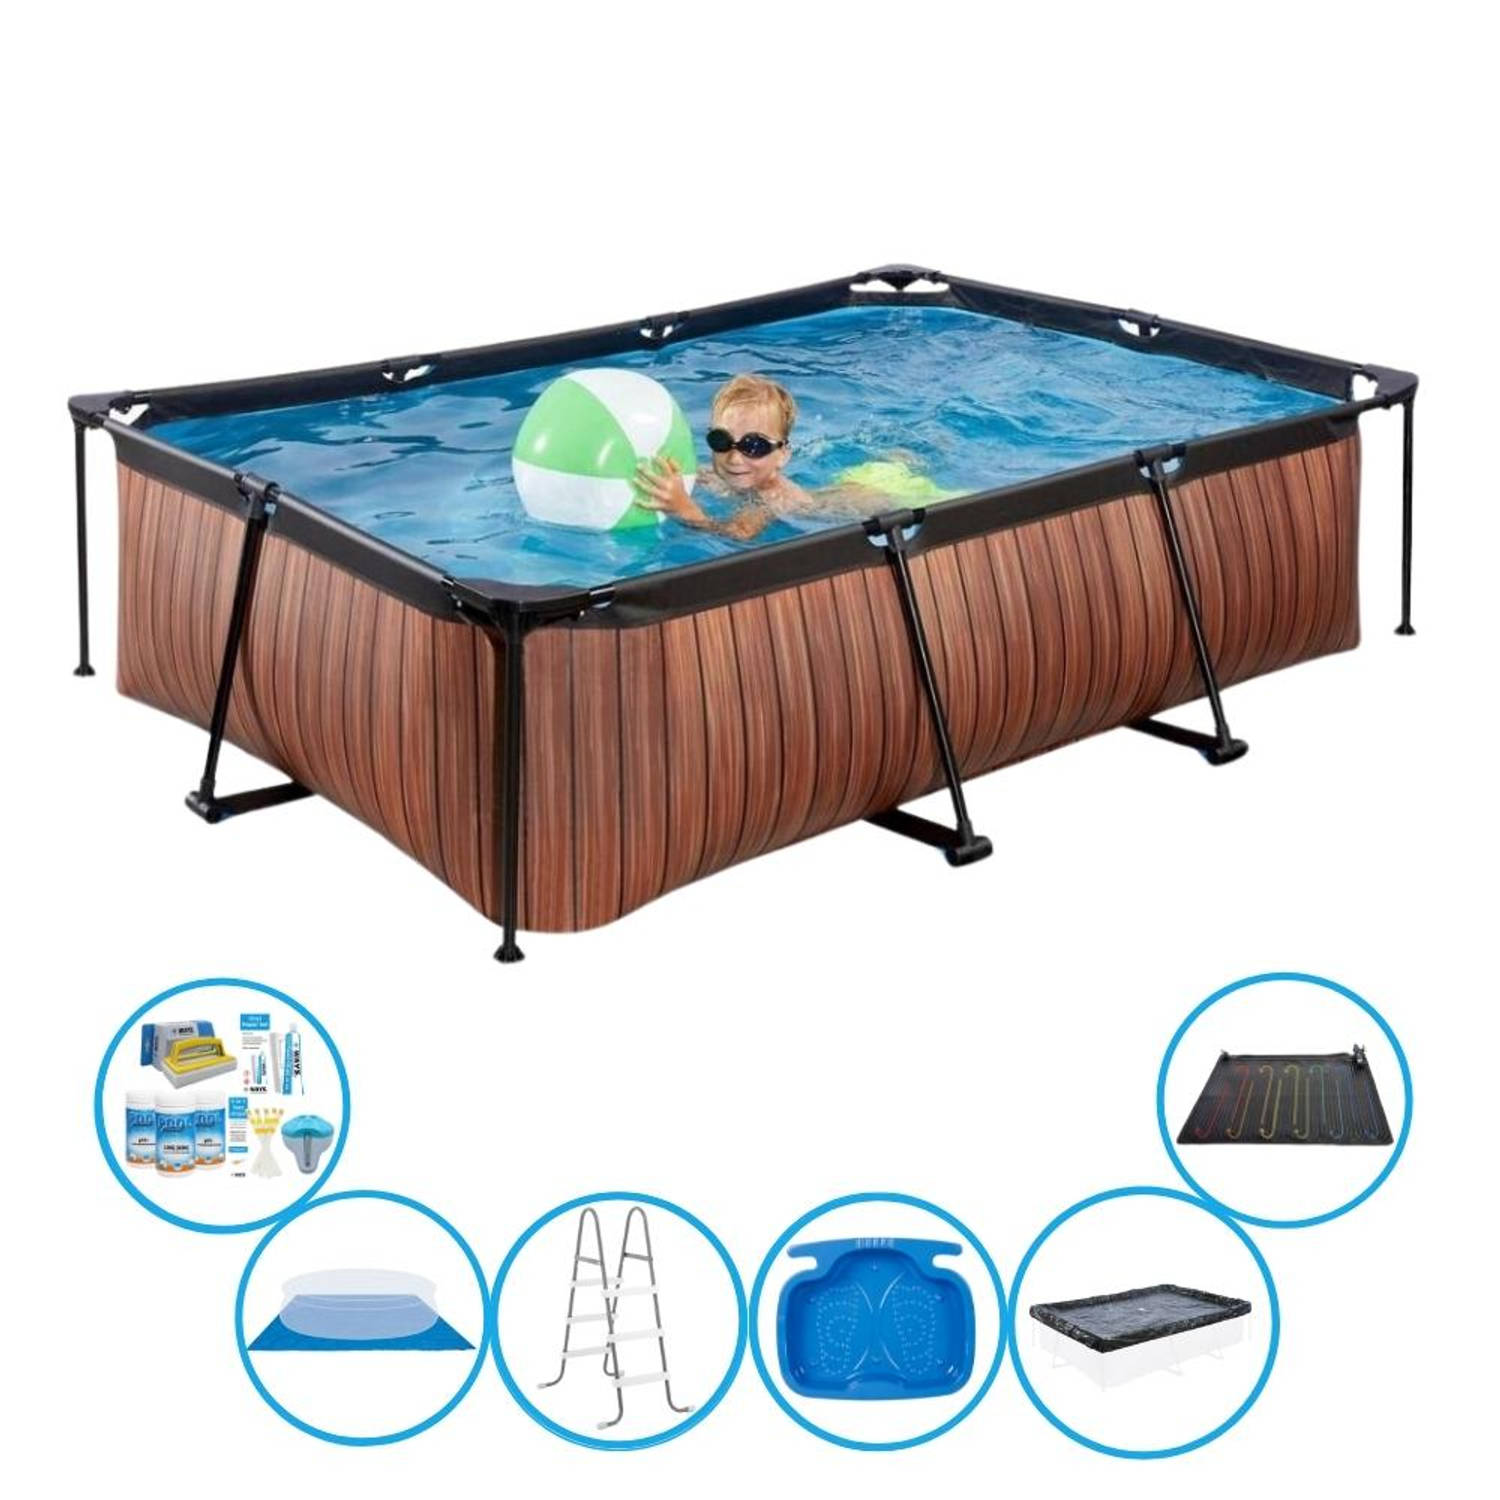 Exit Zwembad Timber Style Frame Pool 220x150x60 Cm Inclusief Toebehoren